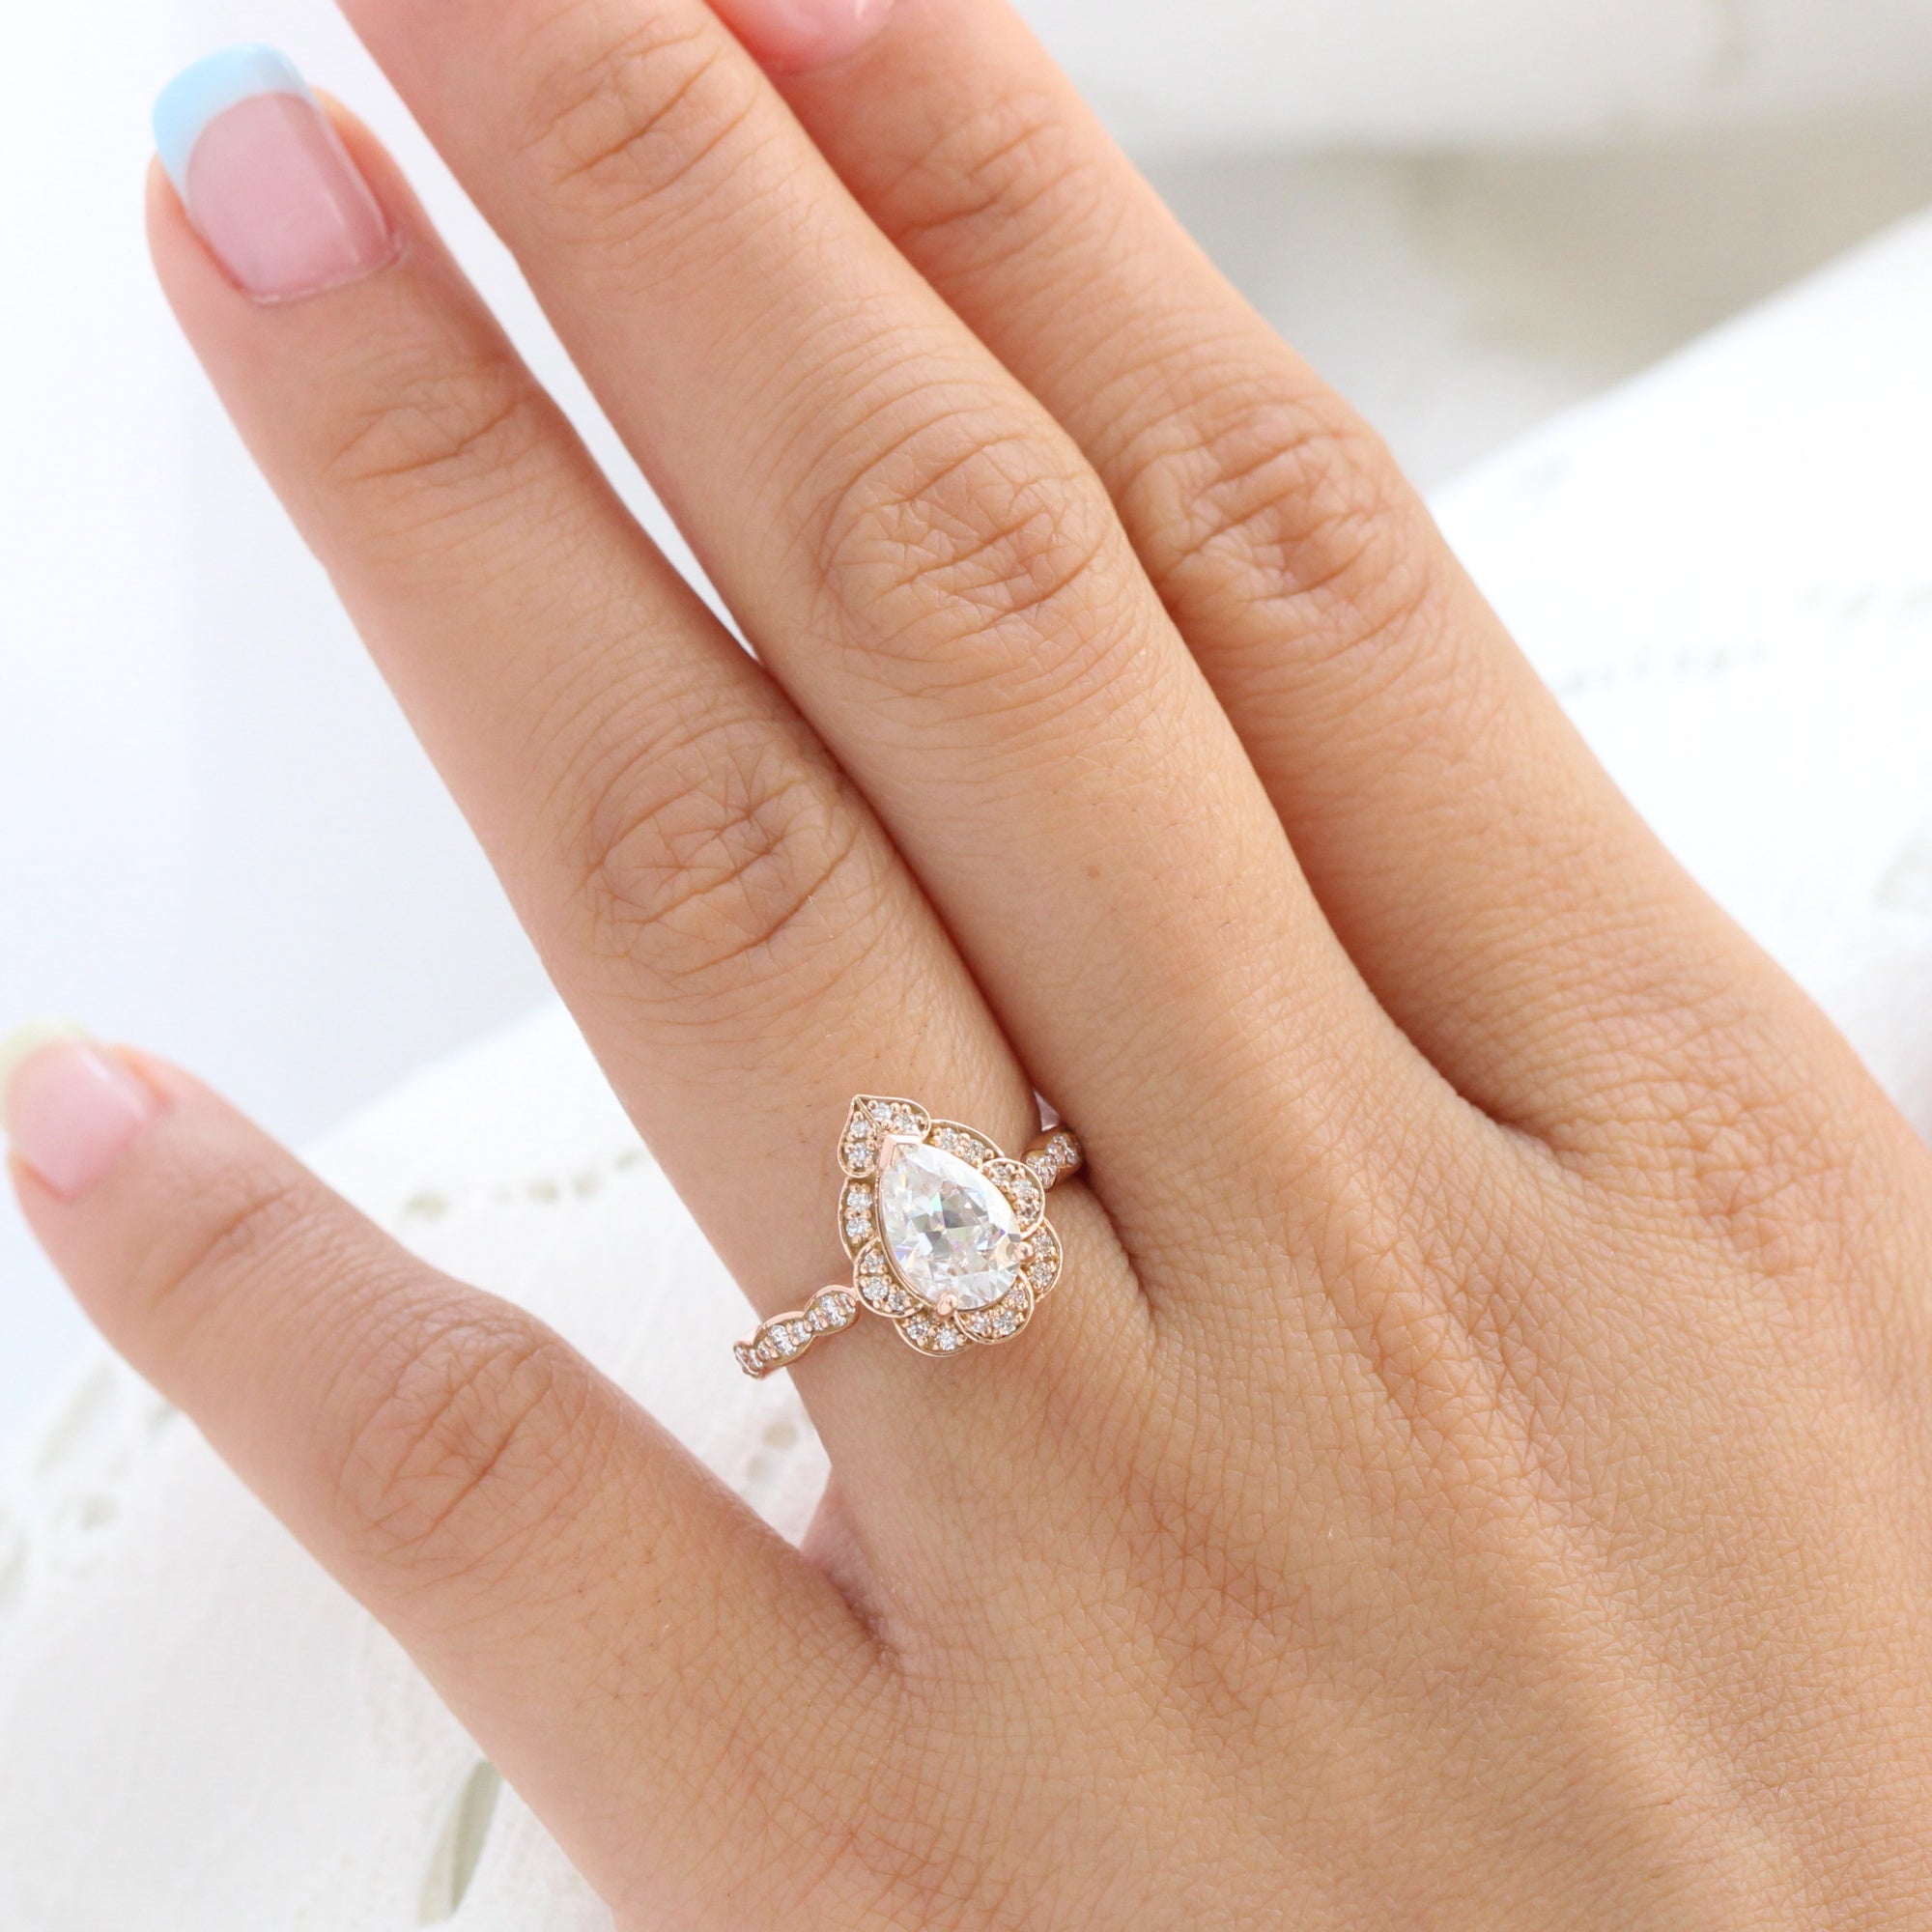 pear moissanite engagement ring rose gold vintage halo diamond ring la more design jewelry